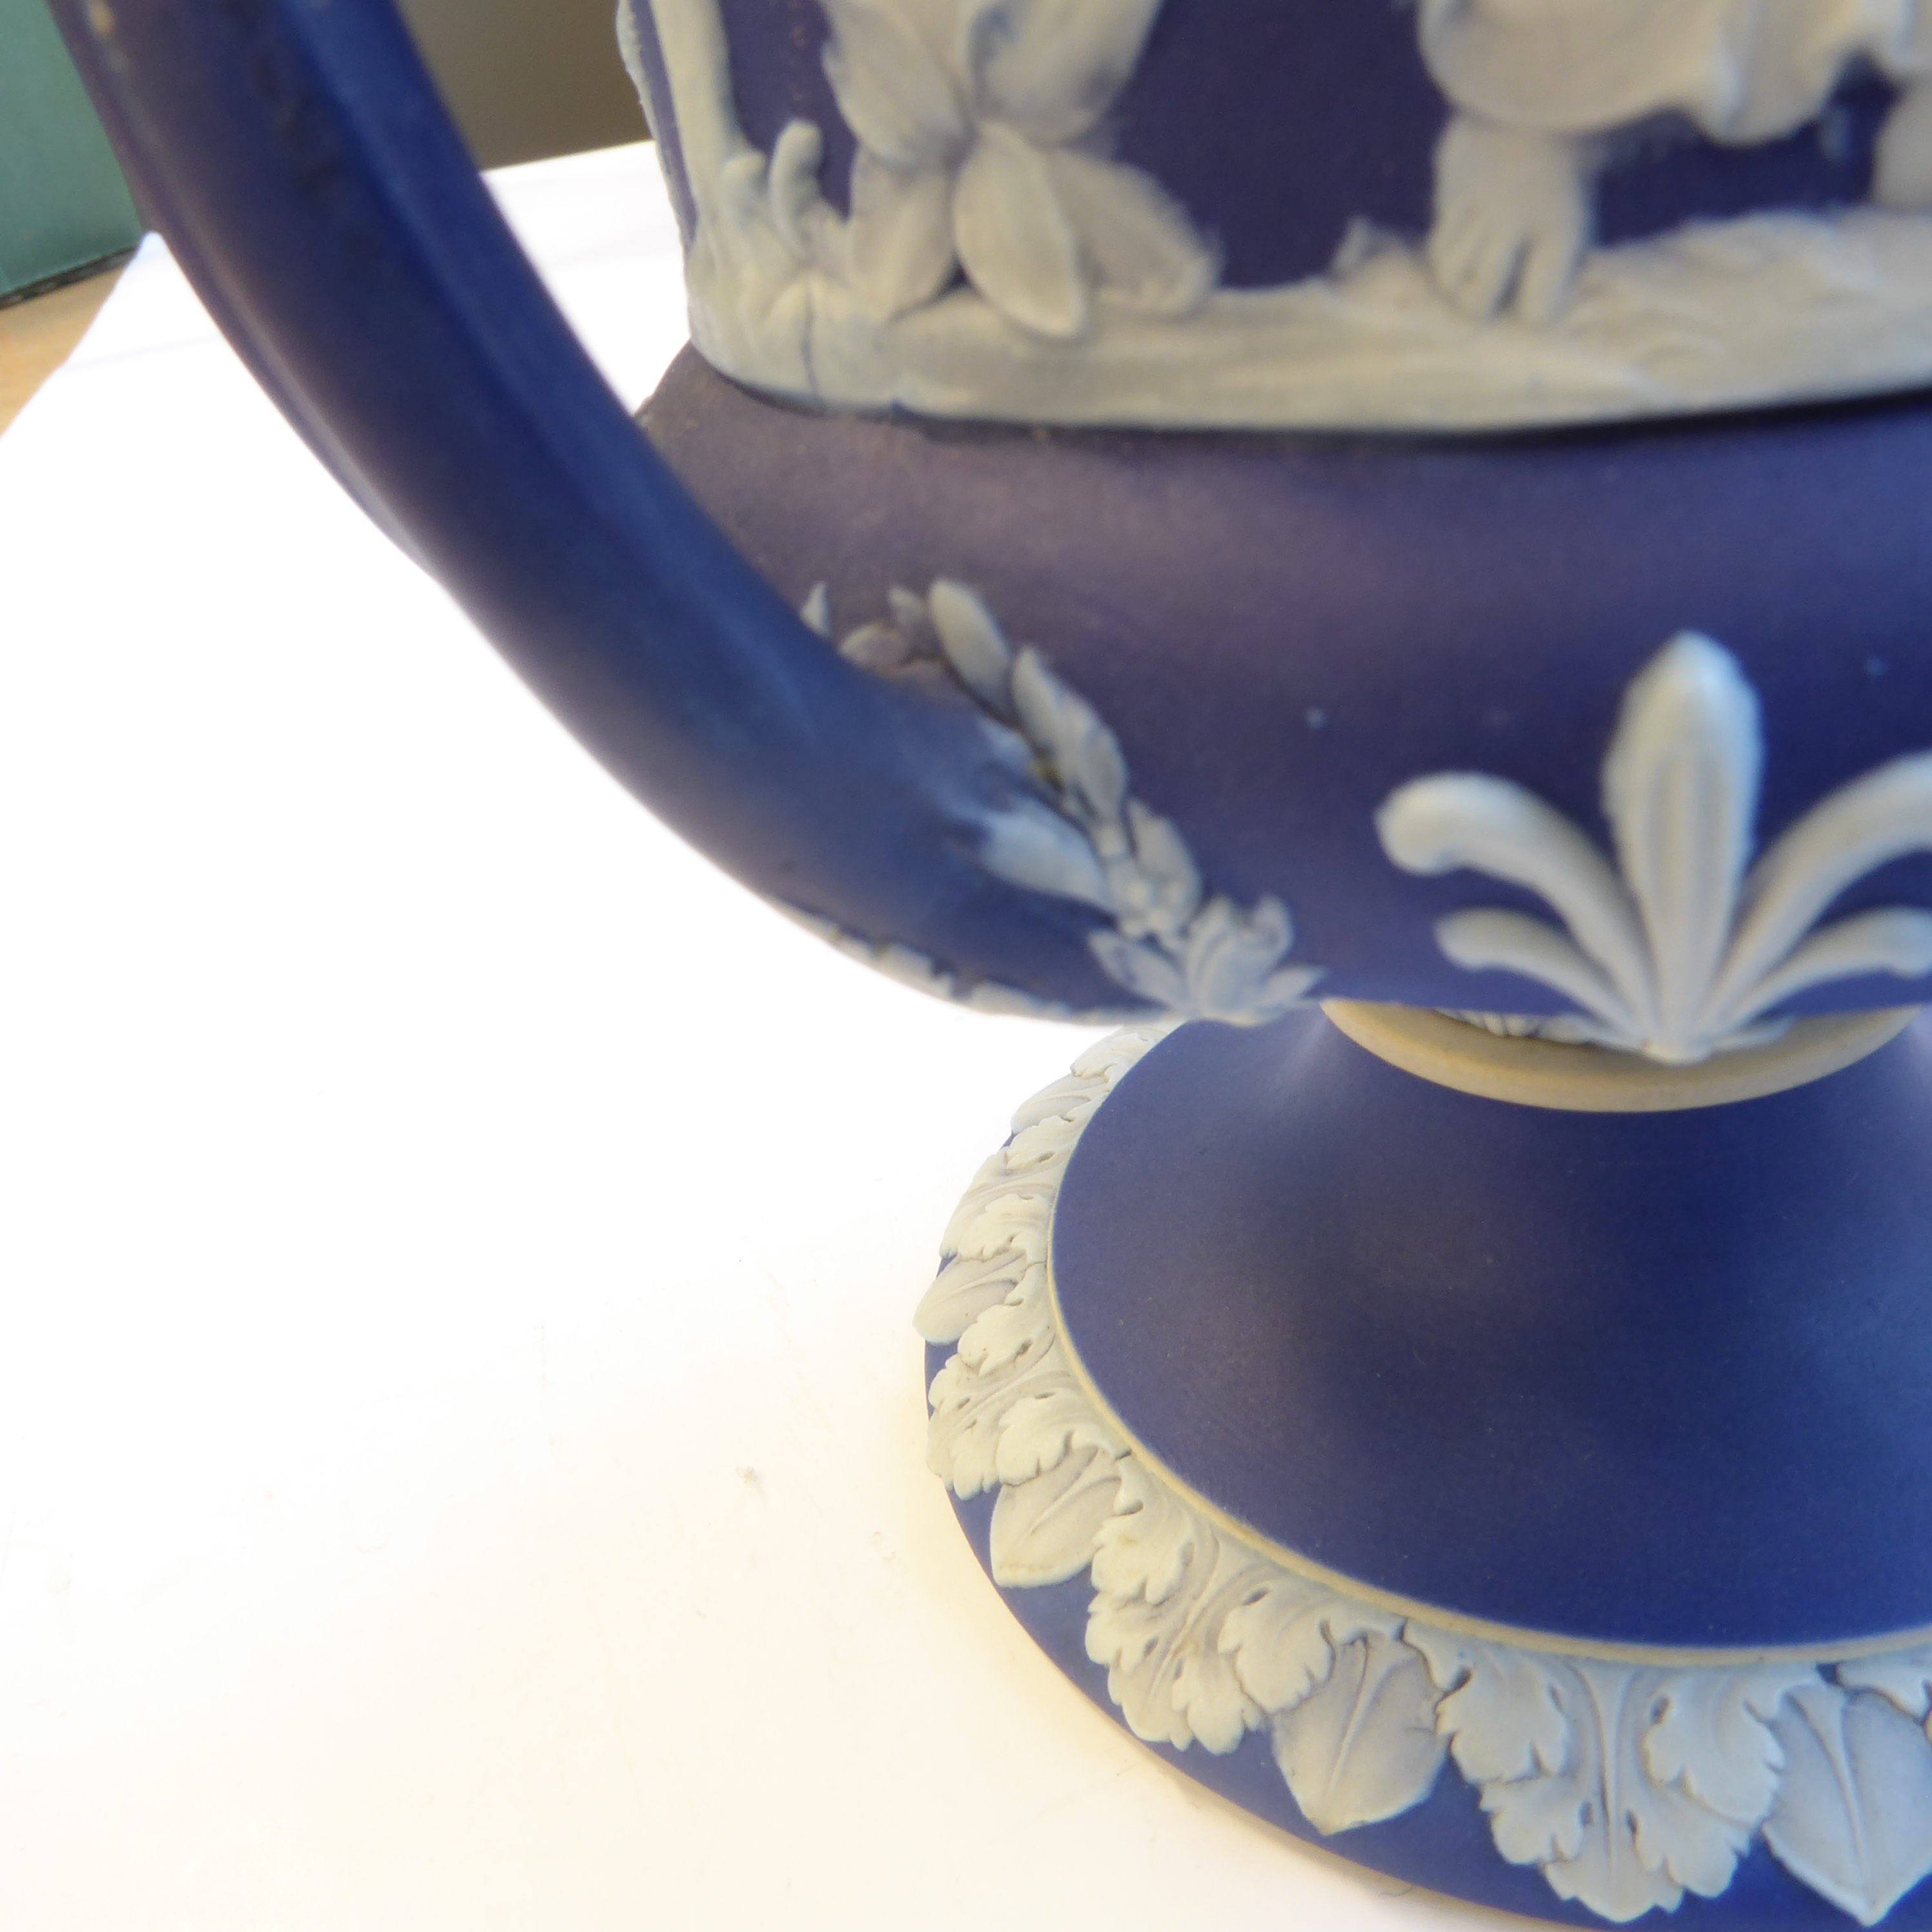 Various 19th / early 20th century Wedgwood Jasperware in typical neo-classical style with applied - Image 21 of 24